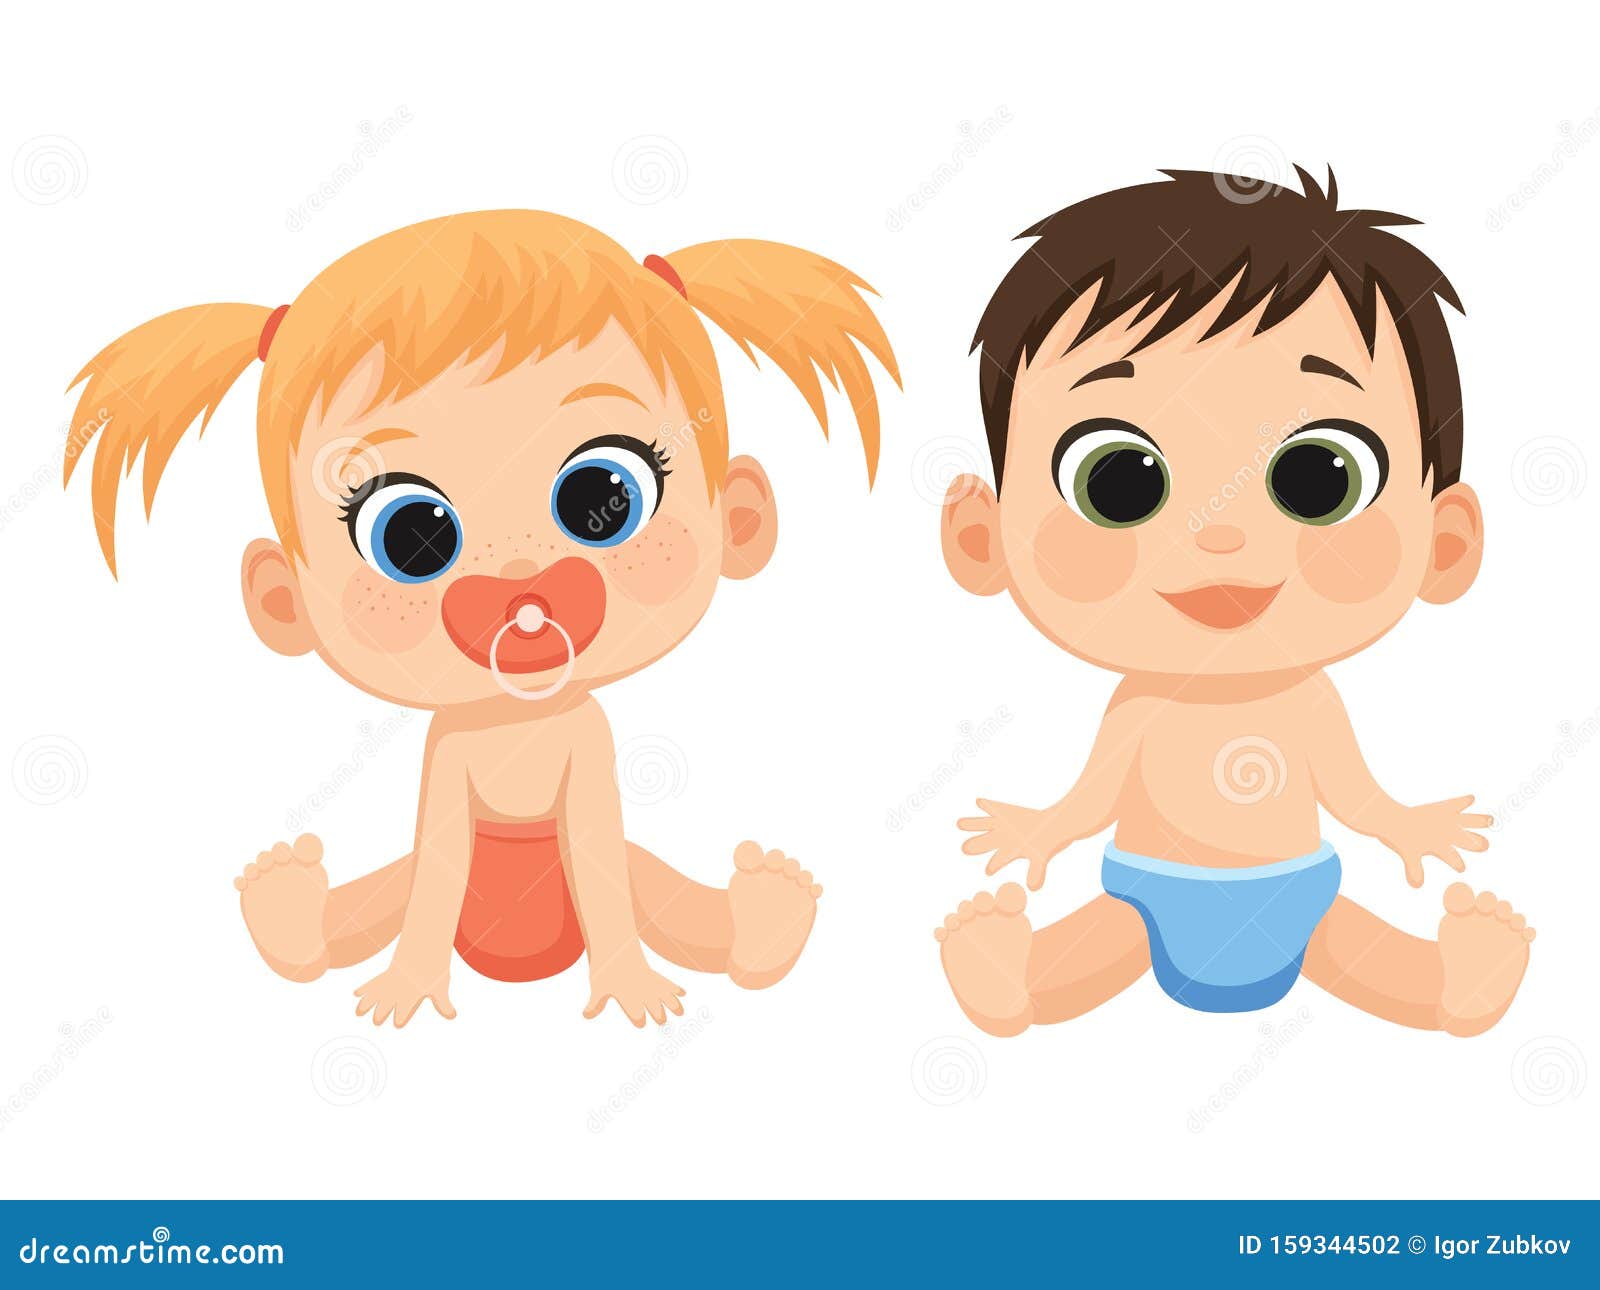 Cartoon Kids. Vector Illustration of Cute Babies. Little Boy and Girl in  Pampers. Happy Babies. Stock Vector - Illustration of cheerful, childhood:  159344502